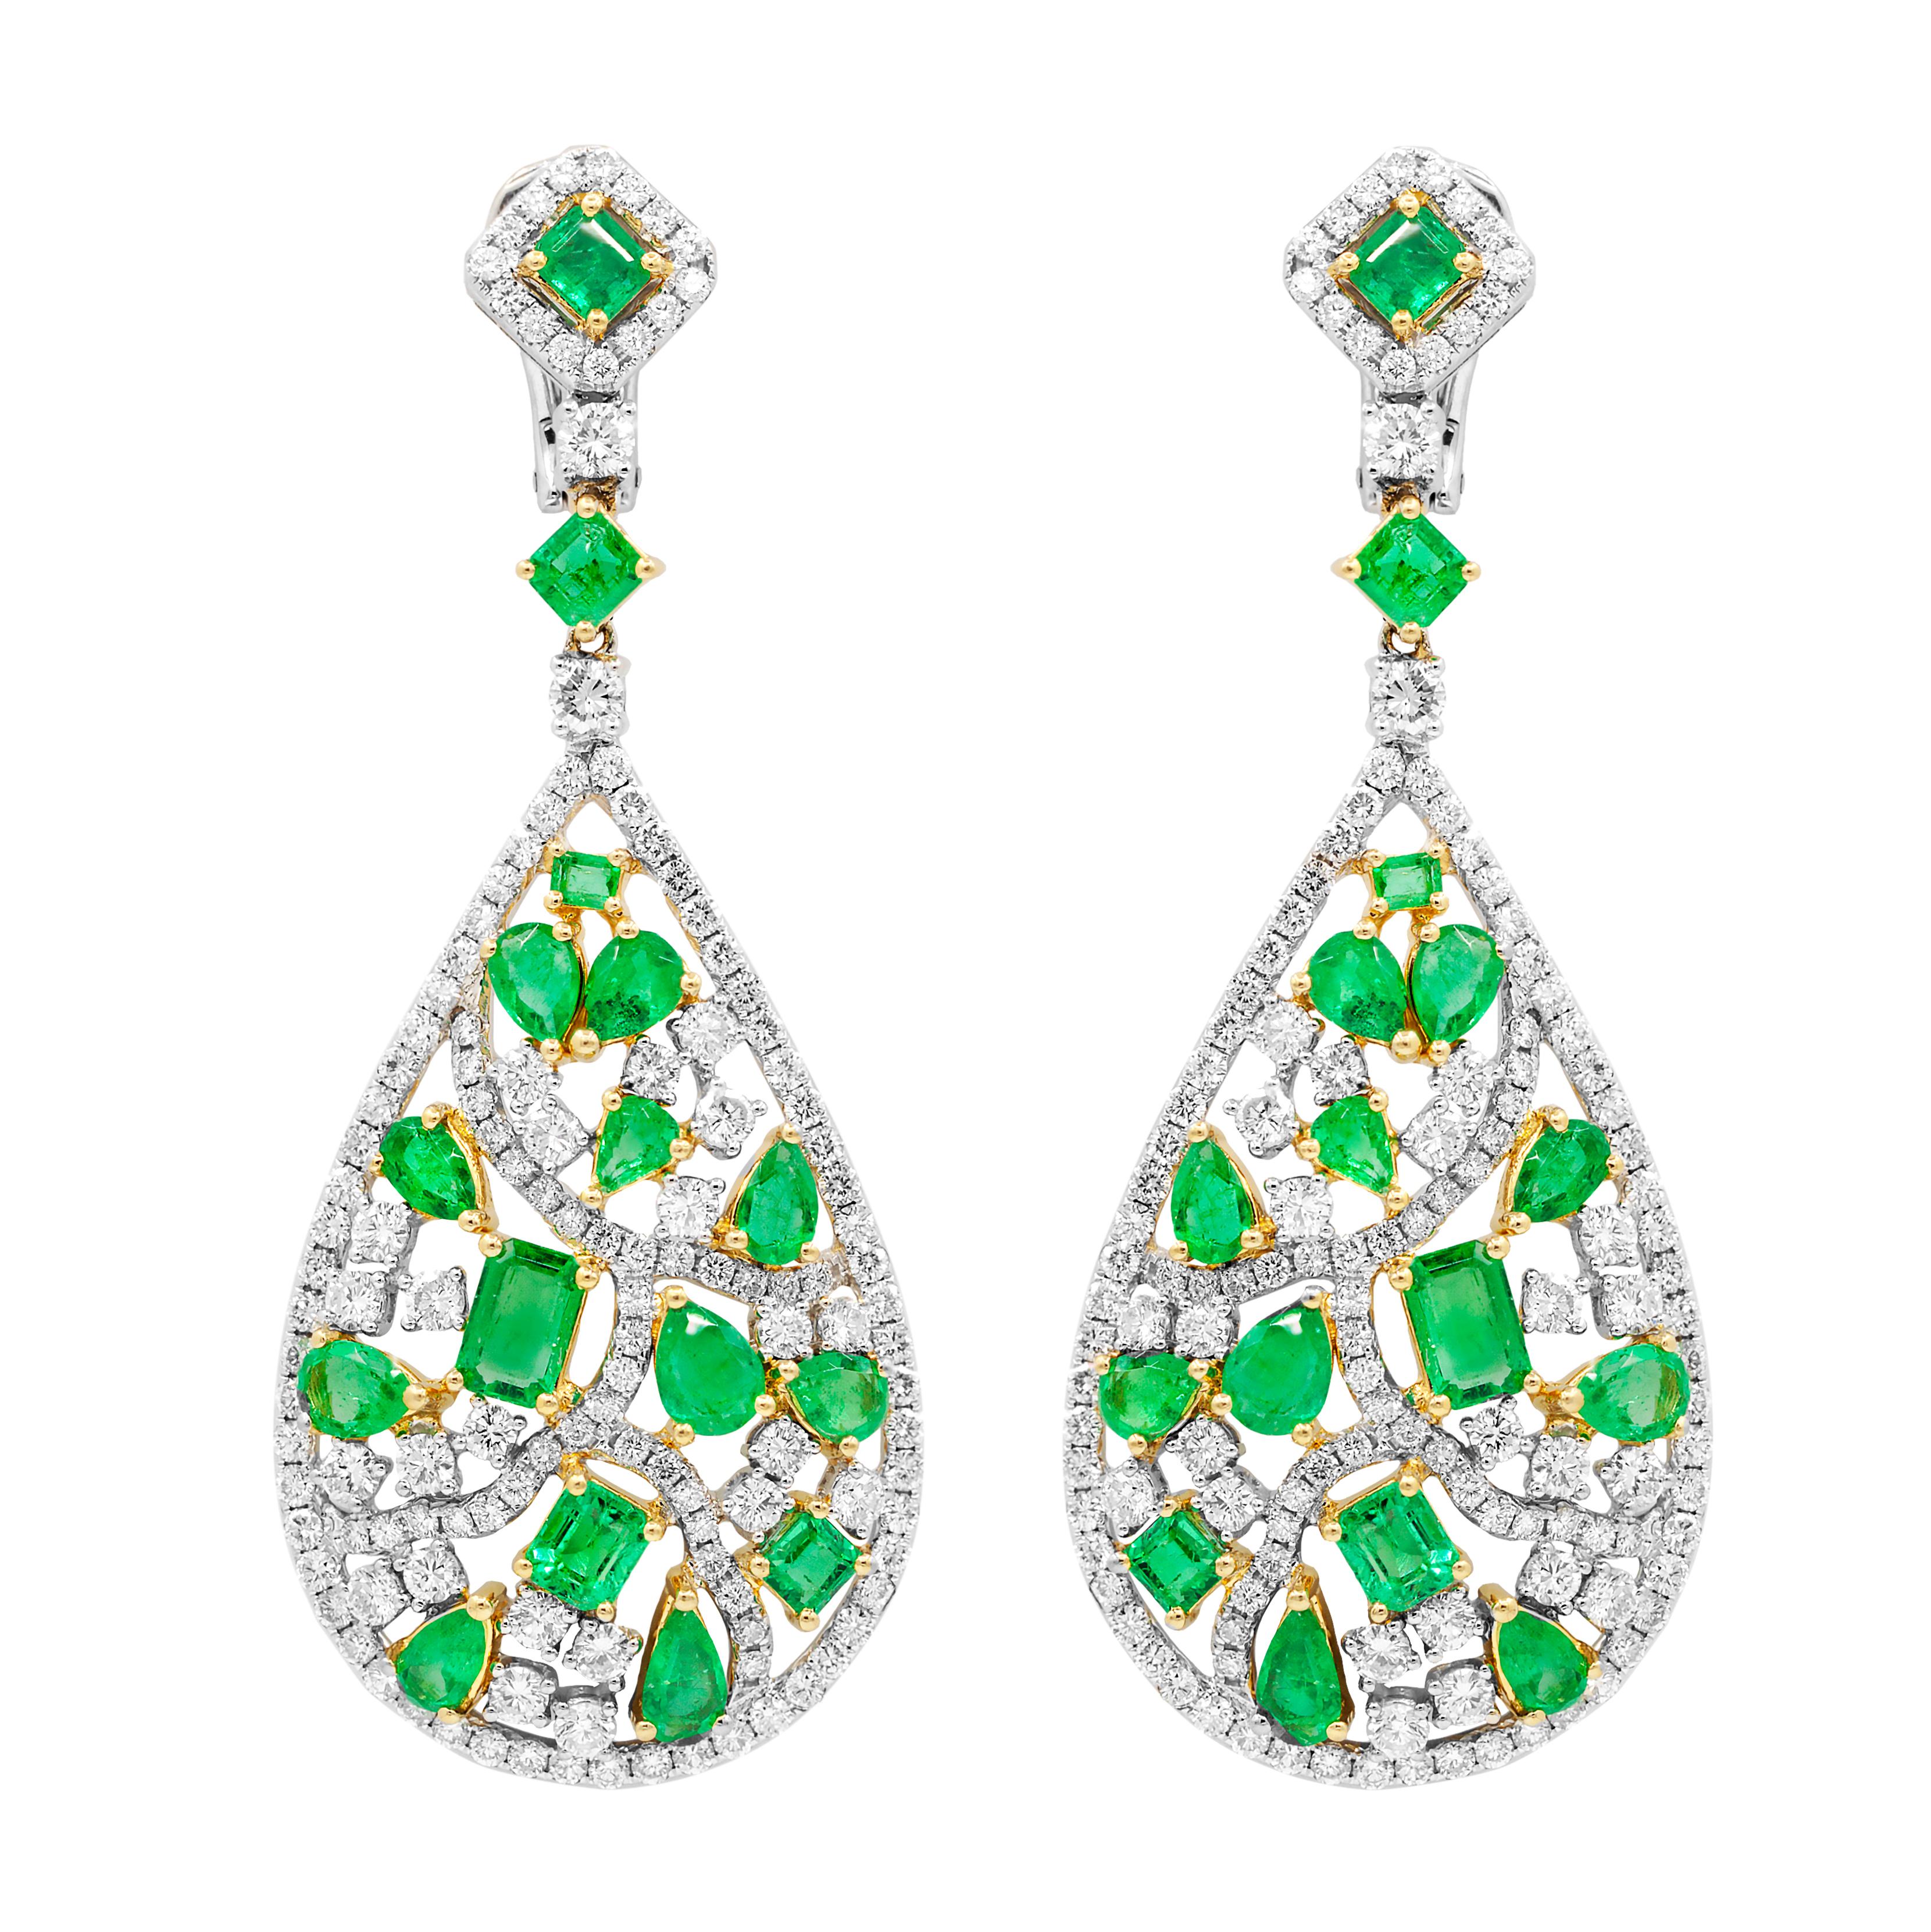 18k white and yellow gold emerald earrings features 10.00 carats of green emeralds and 8.75 carats of diamonds creating a tear dl.Drop design
